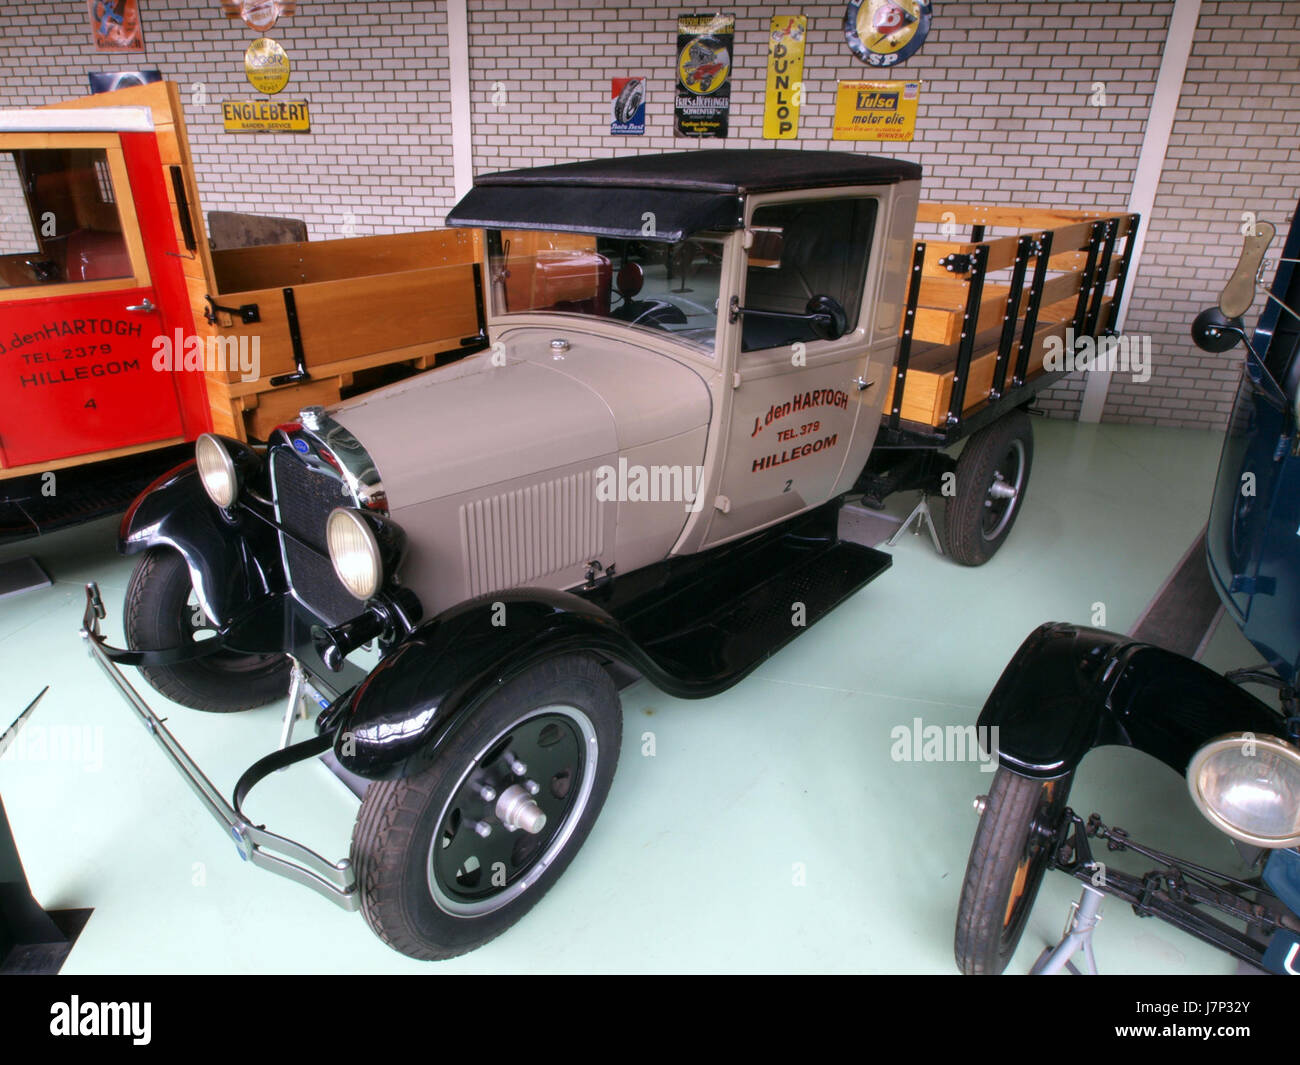 1936 Ford 920 pic1 Stockfoto